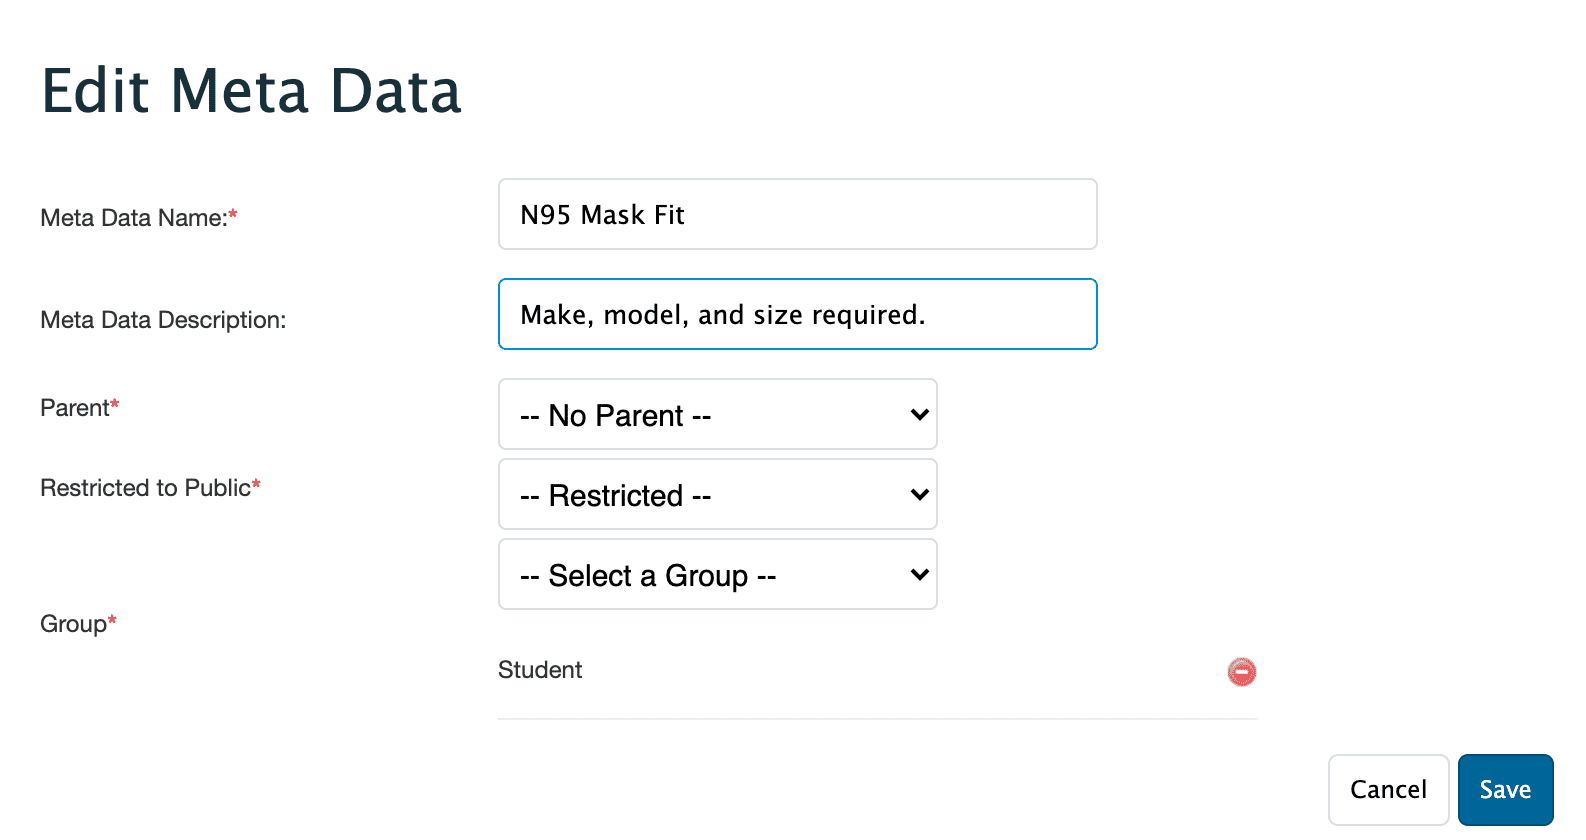 Example Meta Data field for Student user group.